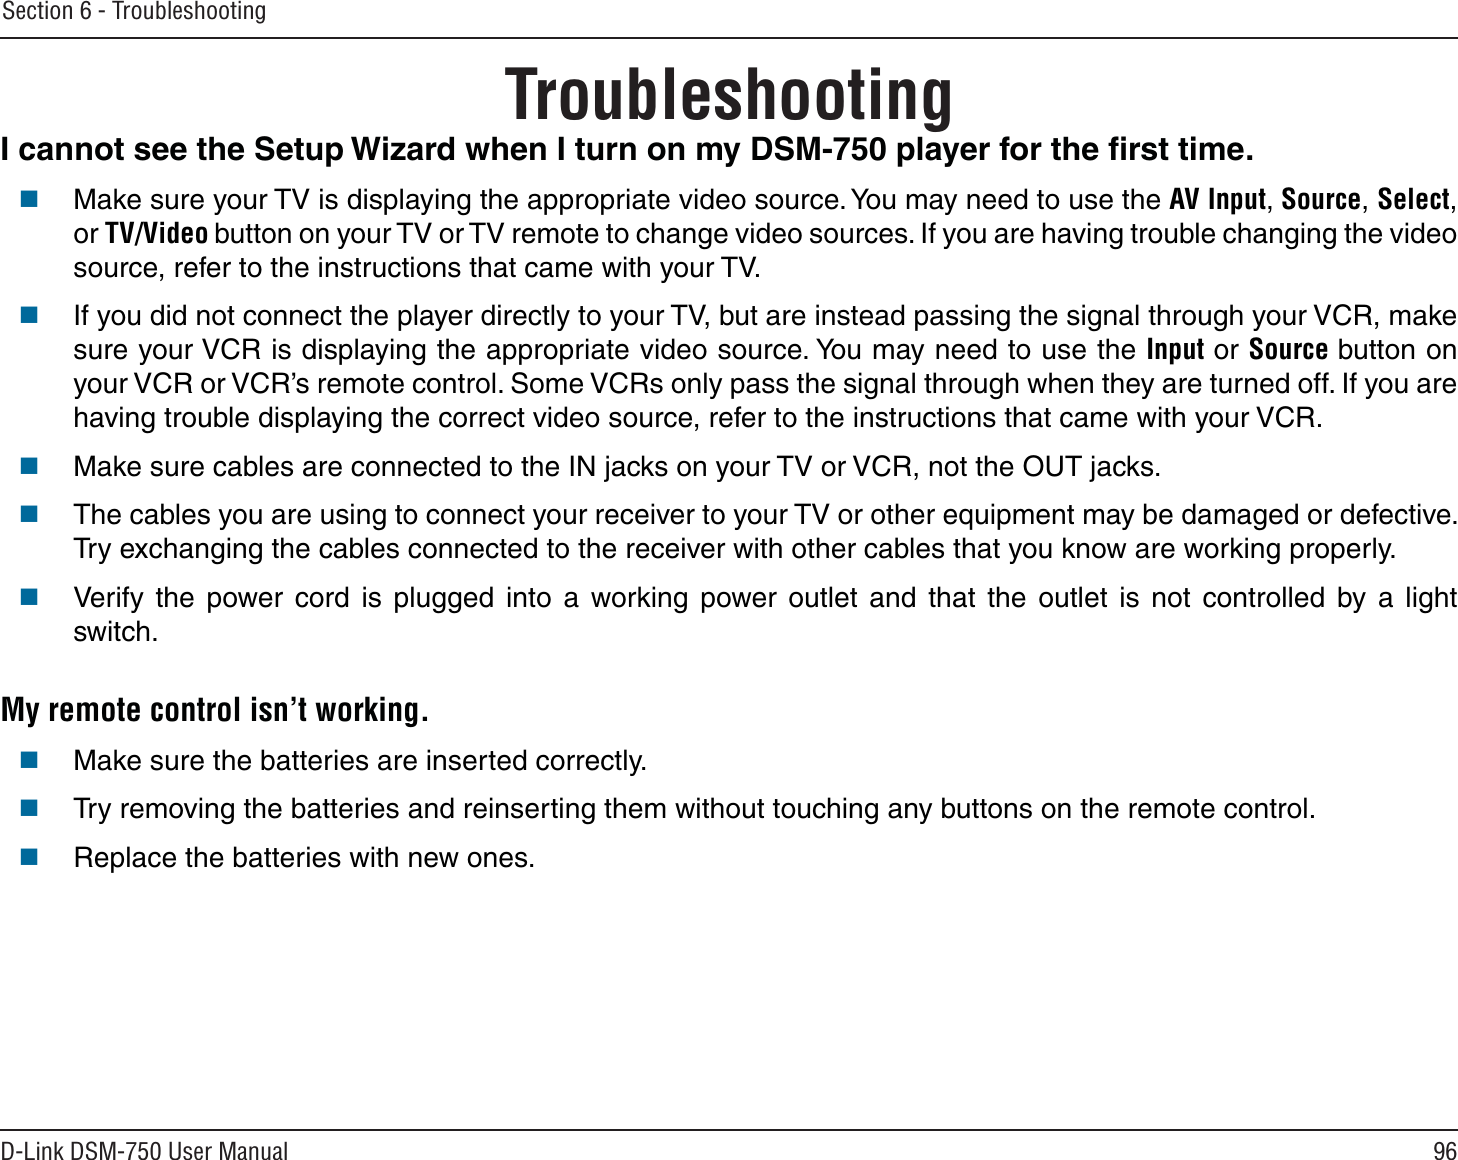 96D-Link DSM-750 User ManualSection 6 - TroubleshootingTroubleshootingI cannot see the Setup Wizard when I turn on my DSM-750 player for the ﬁrst time.Make sure your TV is displaying the appropriate video source. You may need to use the AV Input, Source,Select,or TV/Video button on your TV or TV remote to change video sources. If you are having trouble changing the video source, refer to the instructions that came with your TV. If you did not connect the player directly to your TV, but are instead passing the signal through your VCR, make sure your VCR is displaying the appropriate video source. You may need to use the Input or Source button on your VCR or VCR’s remote control. Some VCRs only pass the signal through when they are turned off. If you are having trouble displaying the correct video source, refer to the instructions that came with your VCR.Make sure cables are connected to the IN jacks on your TV or VCR, not the OUT jacks.The cables you are using to connect your receiver to your TV or other equipment may be damaged or defective. Try exchanging the cables connected to the receiver with other cables that you know are working properly.Verify the power cord is plugged into a working power outlet and that the outlet is not controlled by a light switch.My remote control isn’t working.Make sure the batteries are inserted correctly.Try removing the batteries and reinserting them without touching any buttons on the remote control.Replace the batteries with new ones.